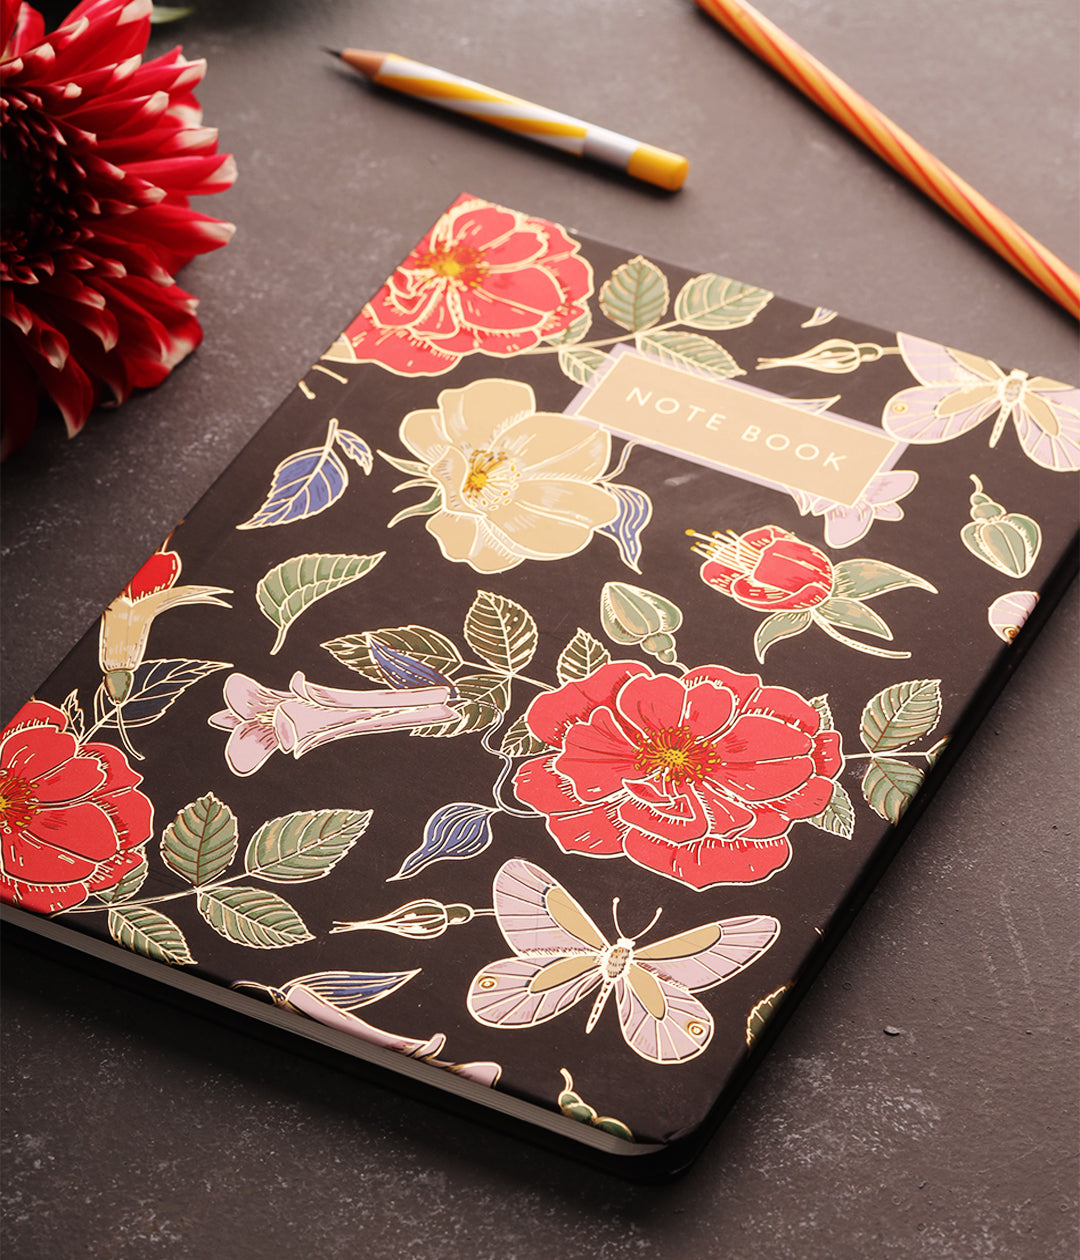 Flower Power Hardbound Notebook Journal Diary with Gold Foil Accents